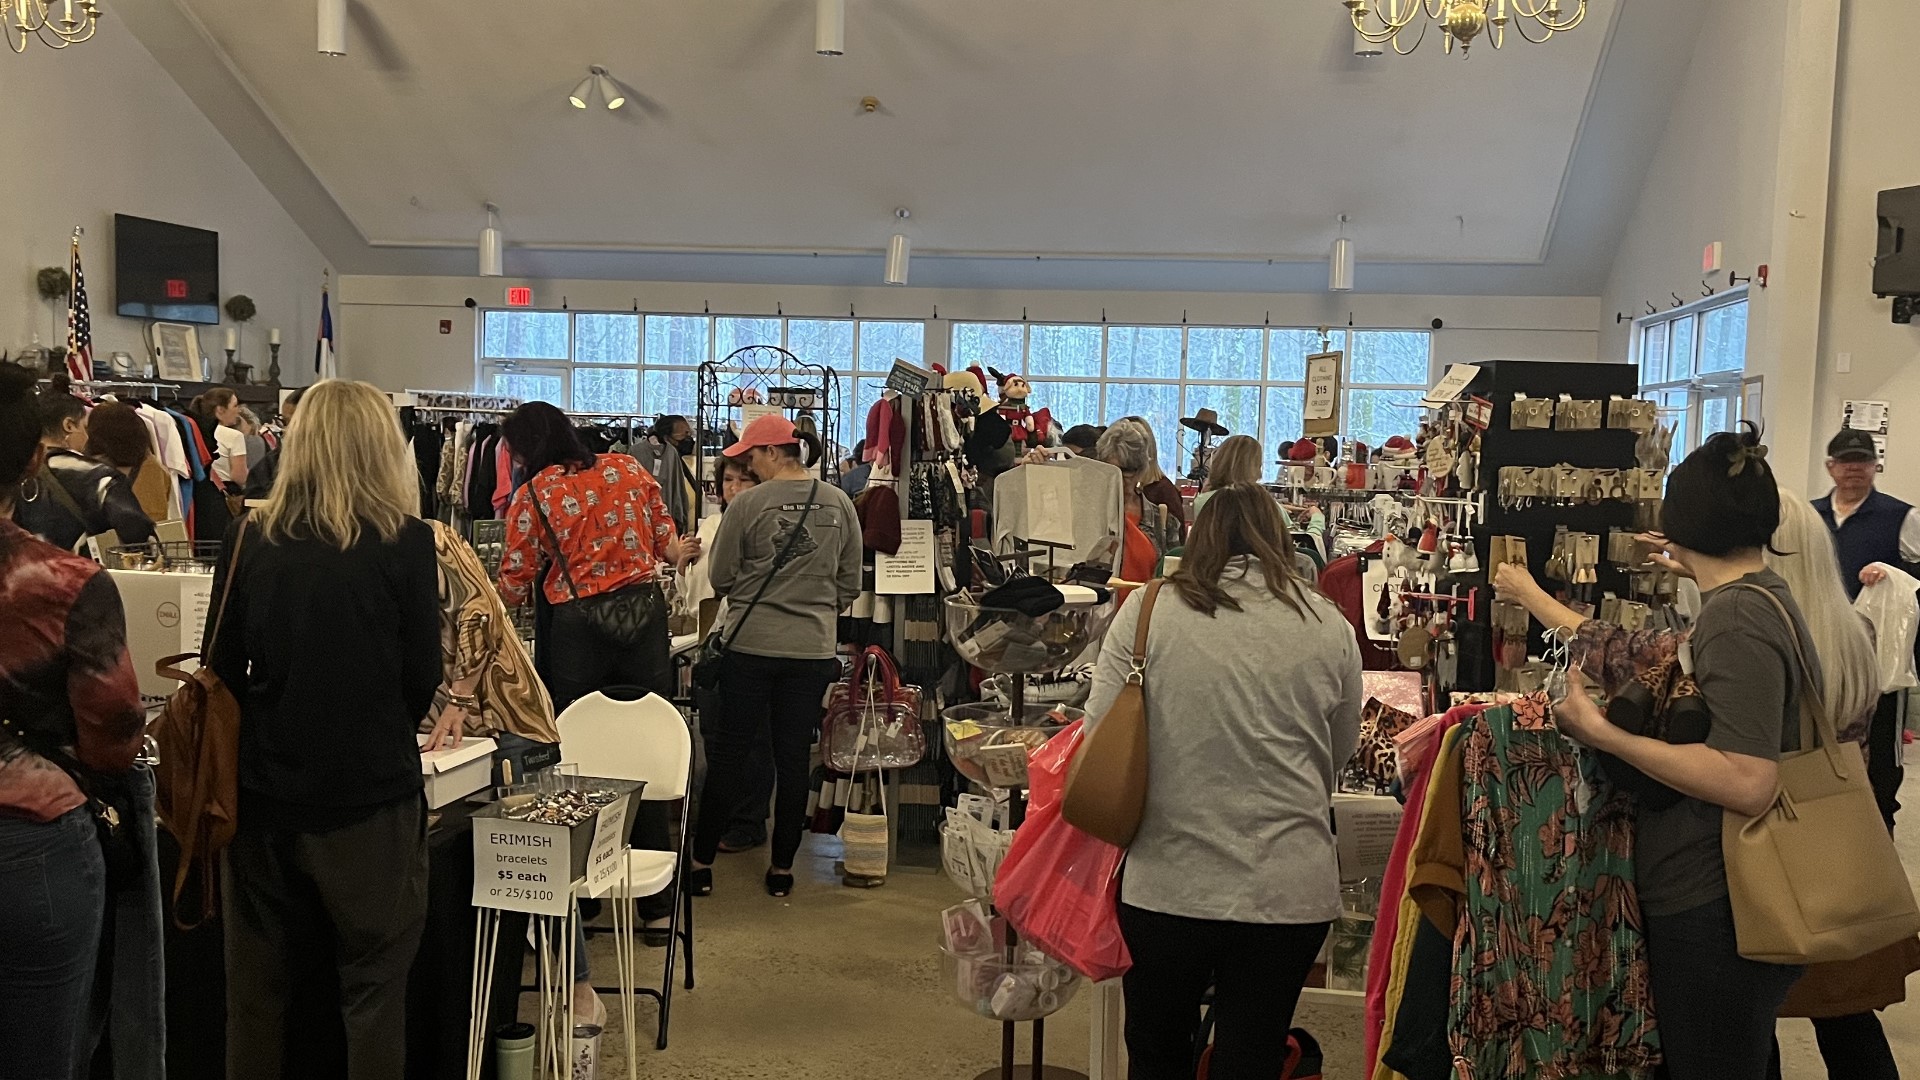 The sale gave shoppers opportunities to save big, as well as donate to The Rescue Mission.